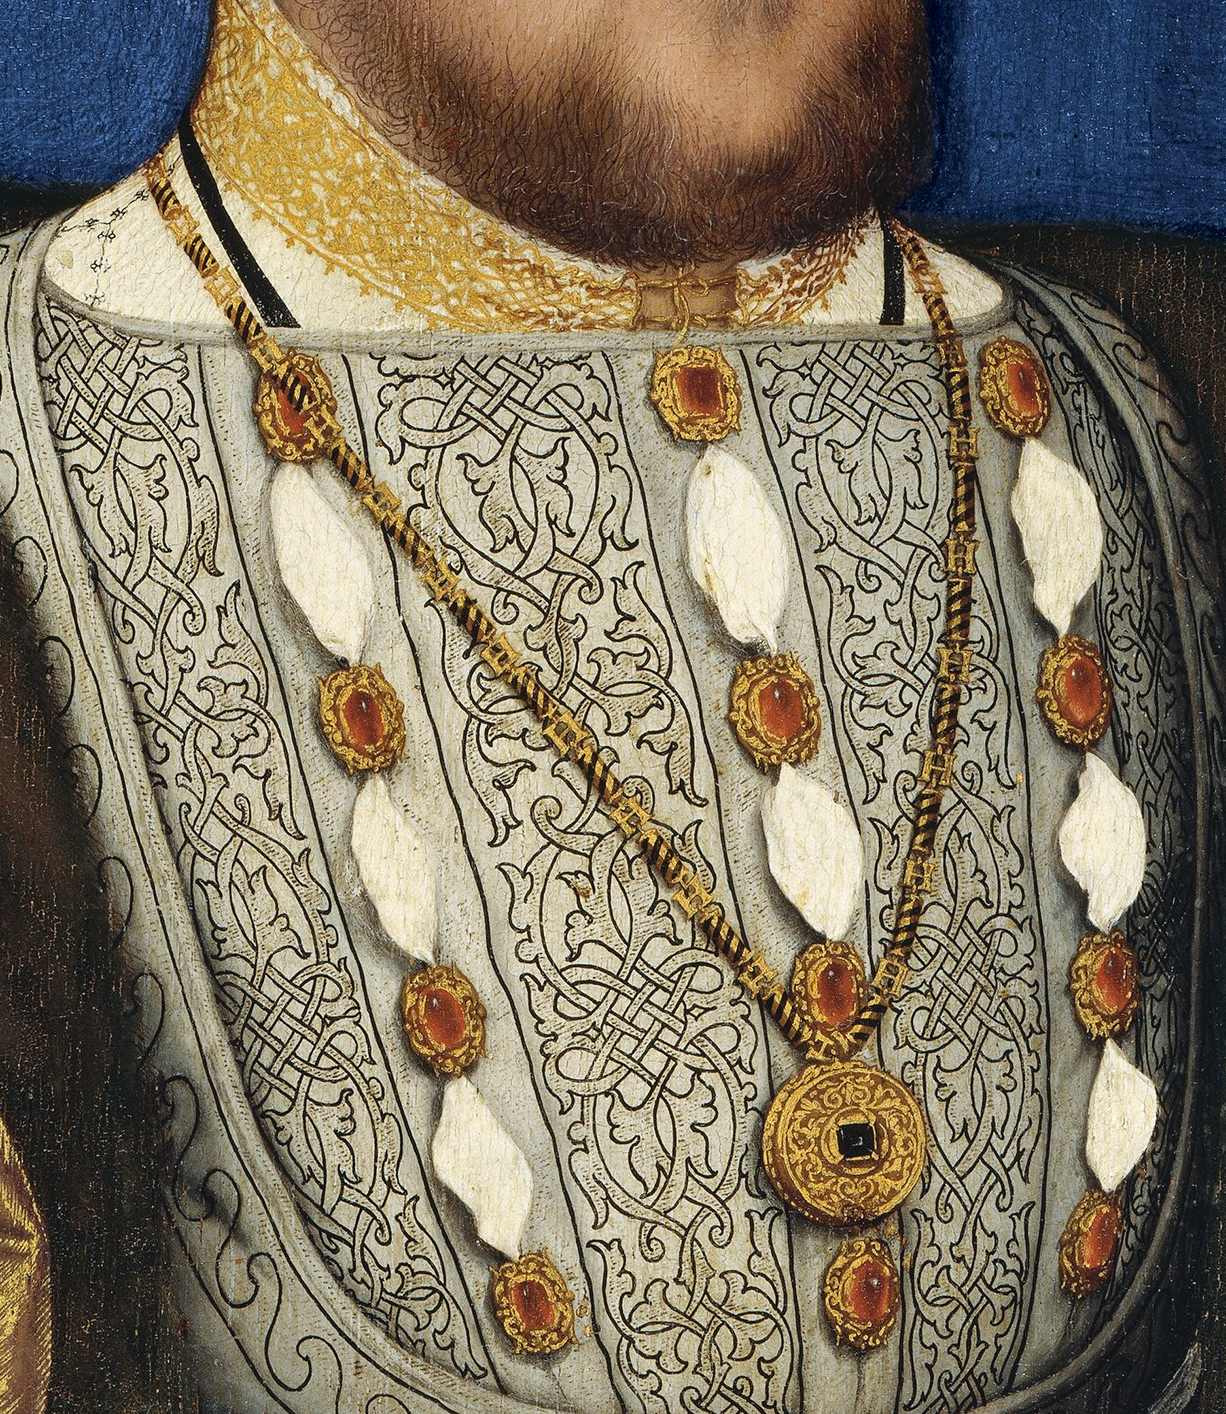 Note the ‘H’ detail on the chain. Detail from Henry VIII by Hans Holbein the Younger, c.1530, Museo Thyssen.